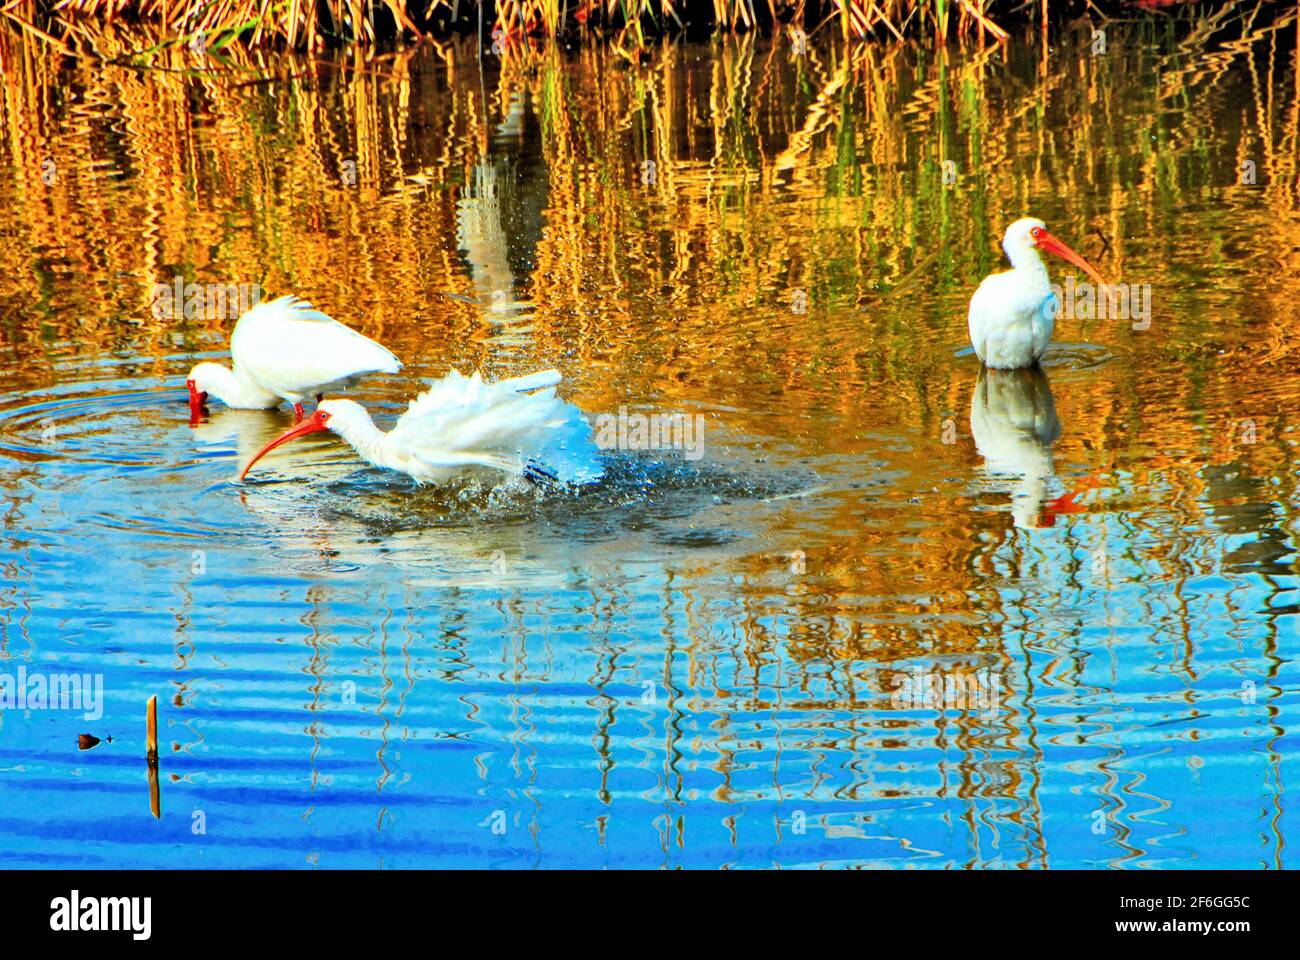 Three white Ibis birds bath in the waters at the World Birding and Nature Center on South Padre Island, Texas, U.S.A... Stock Photo